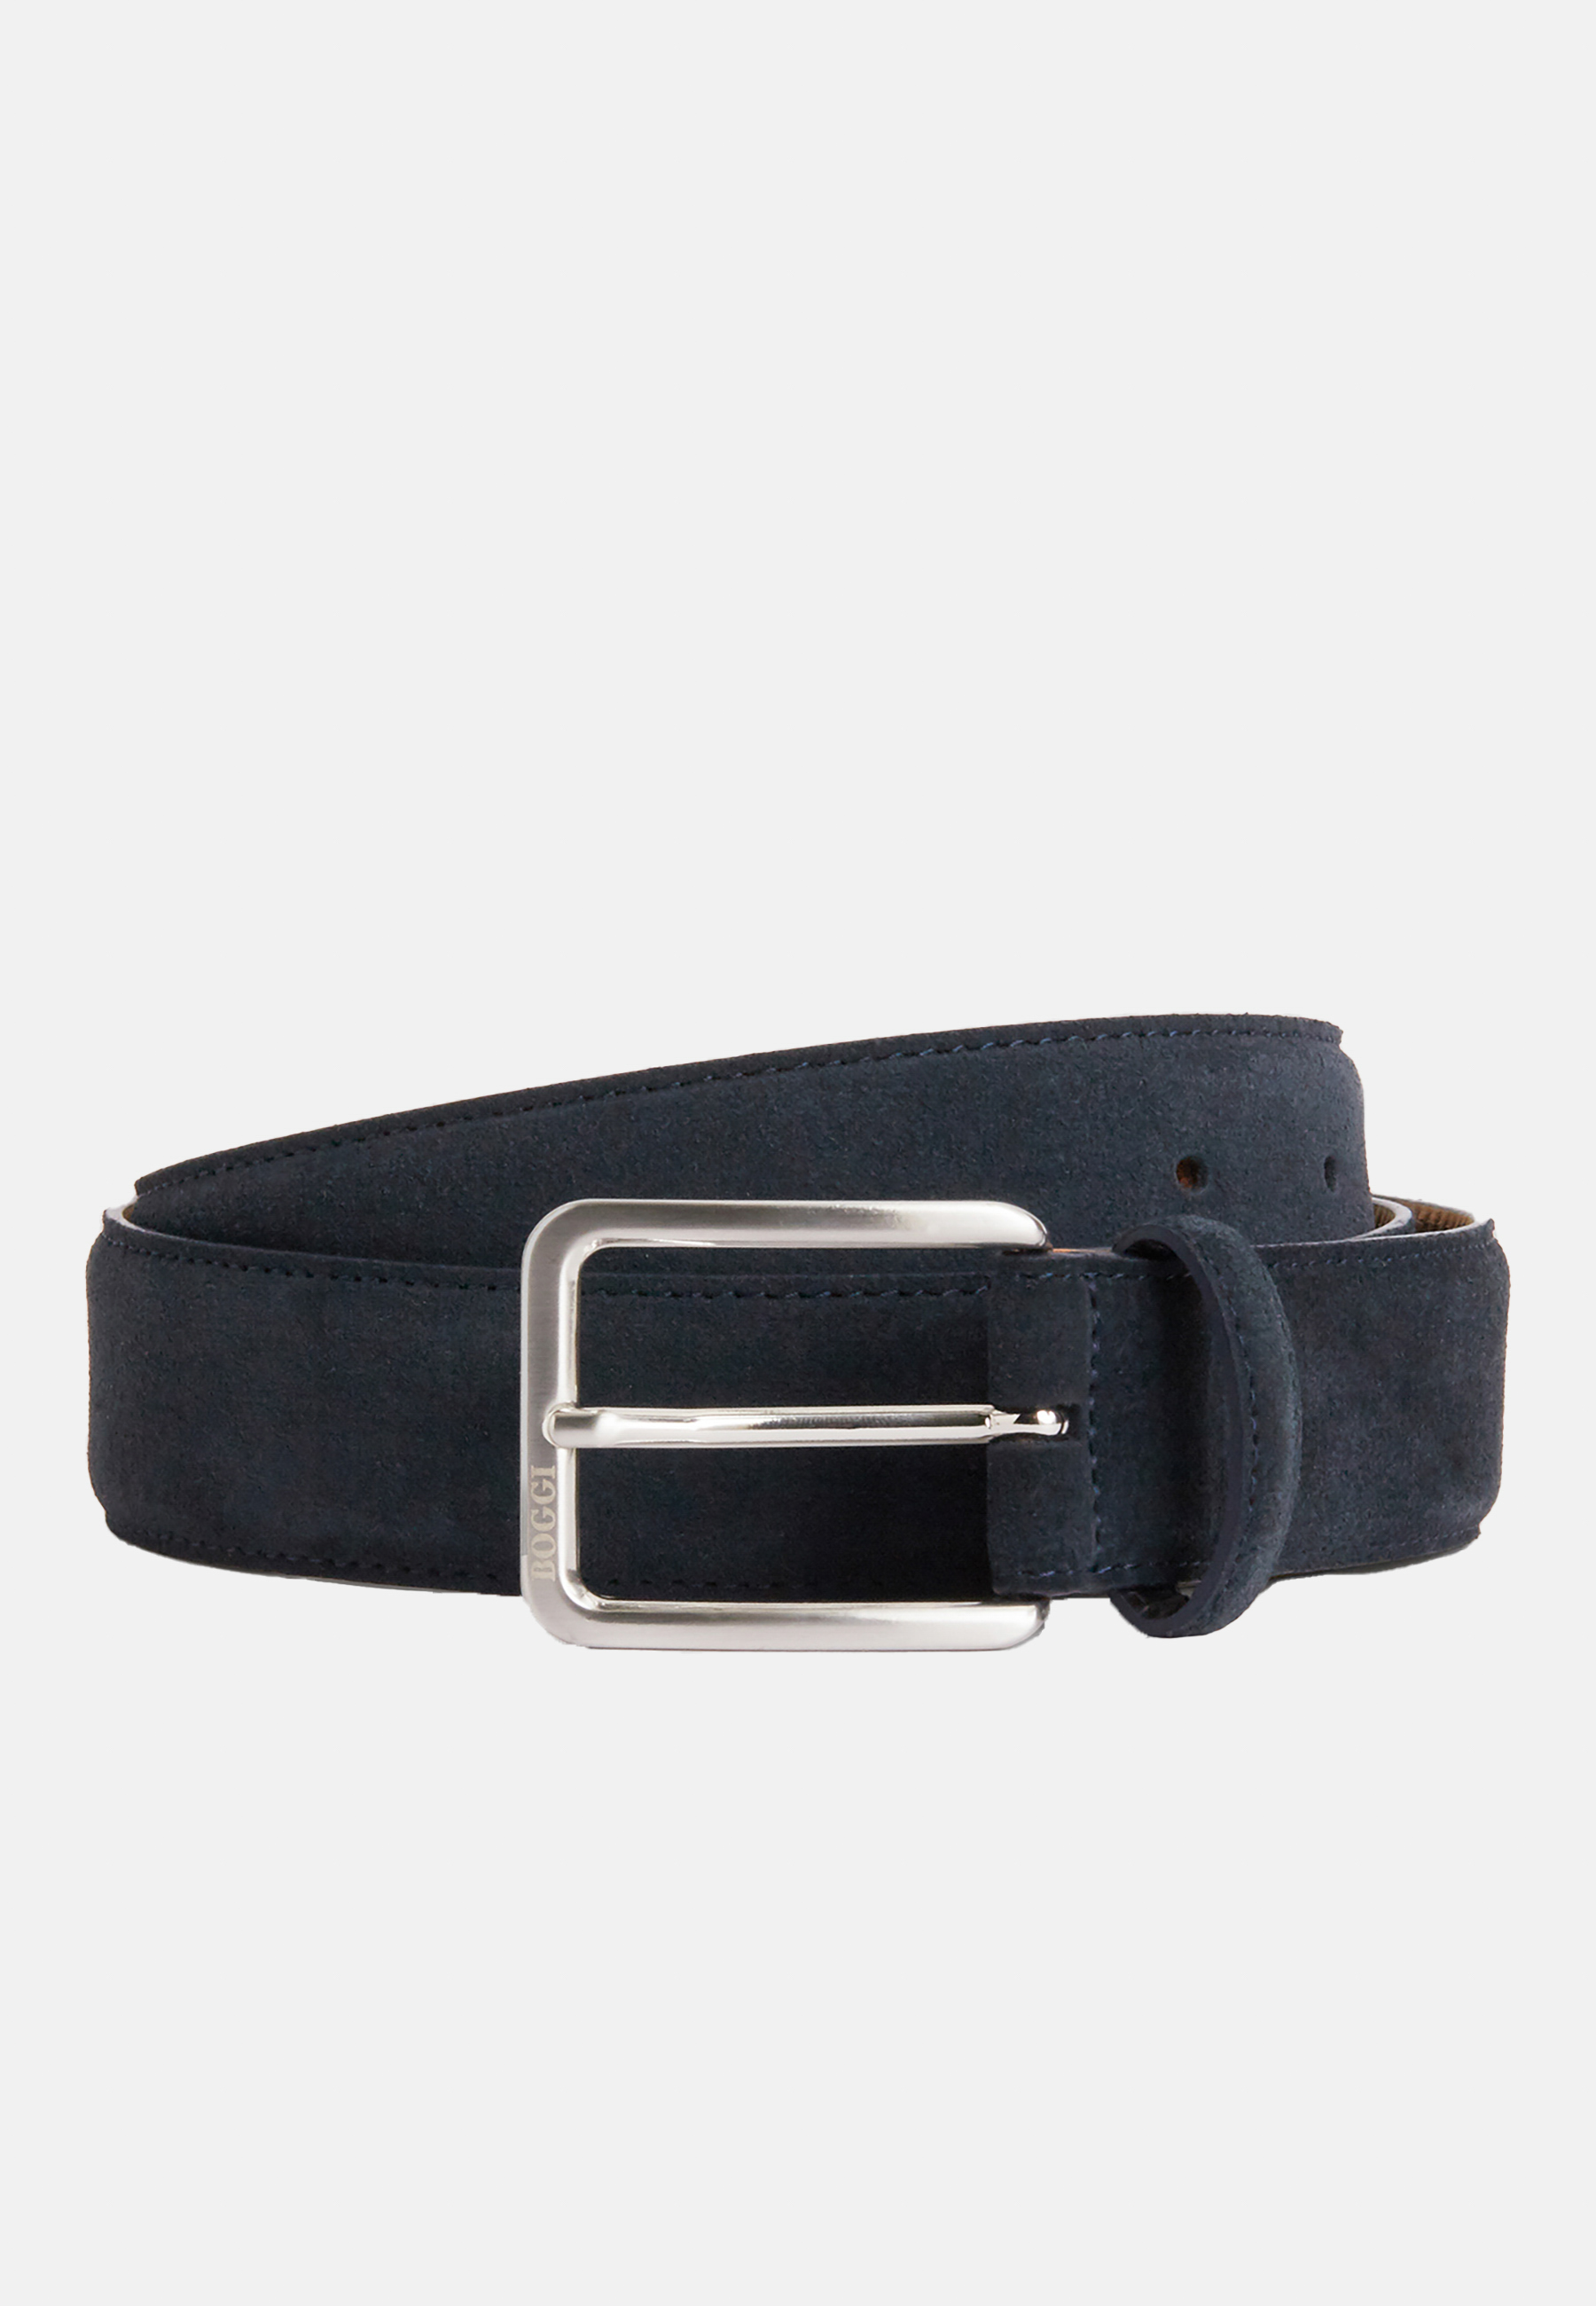 Reversible belt in navy blue suede and white tumbled leather